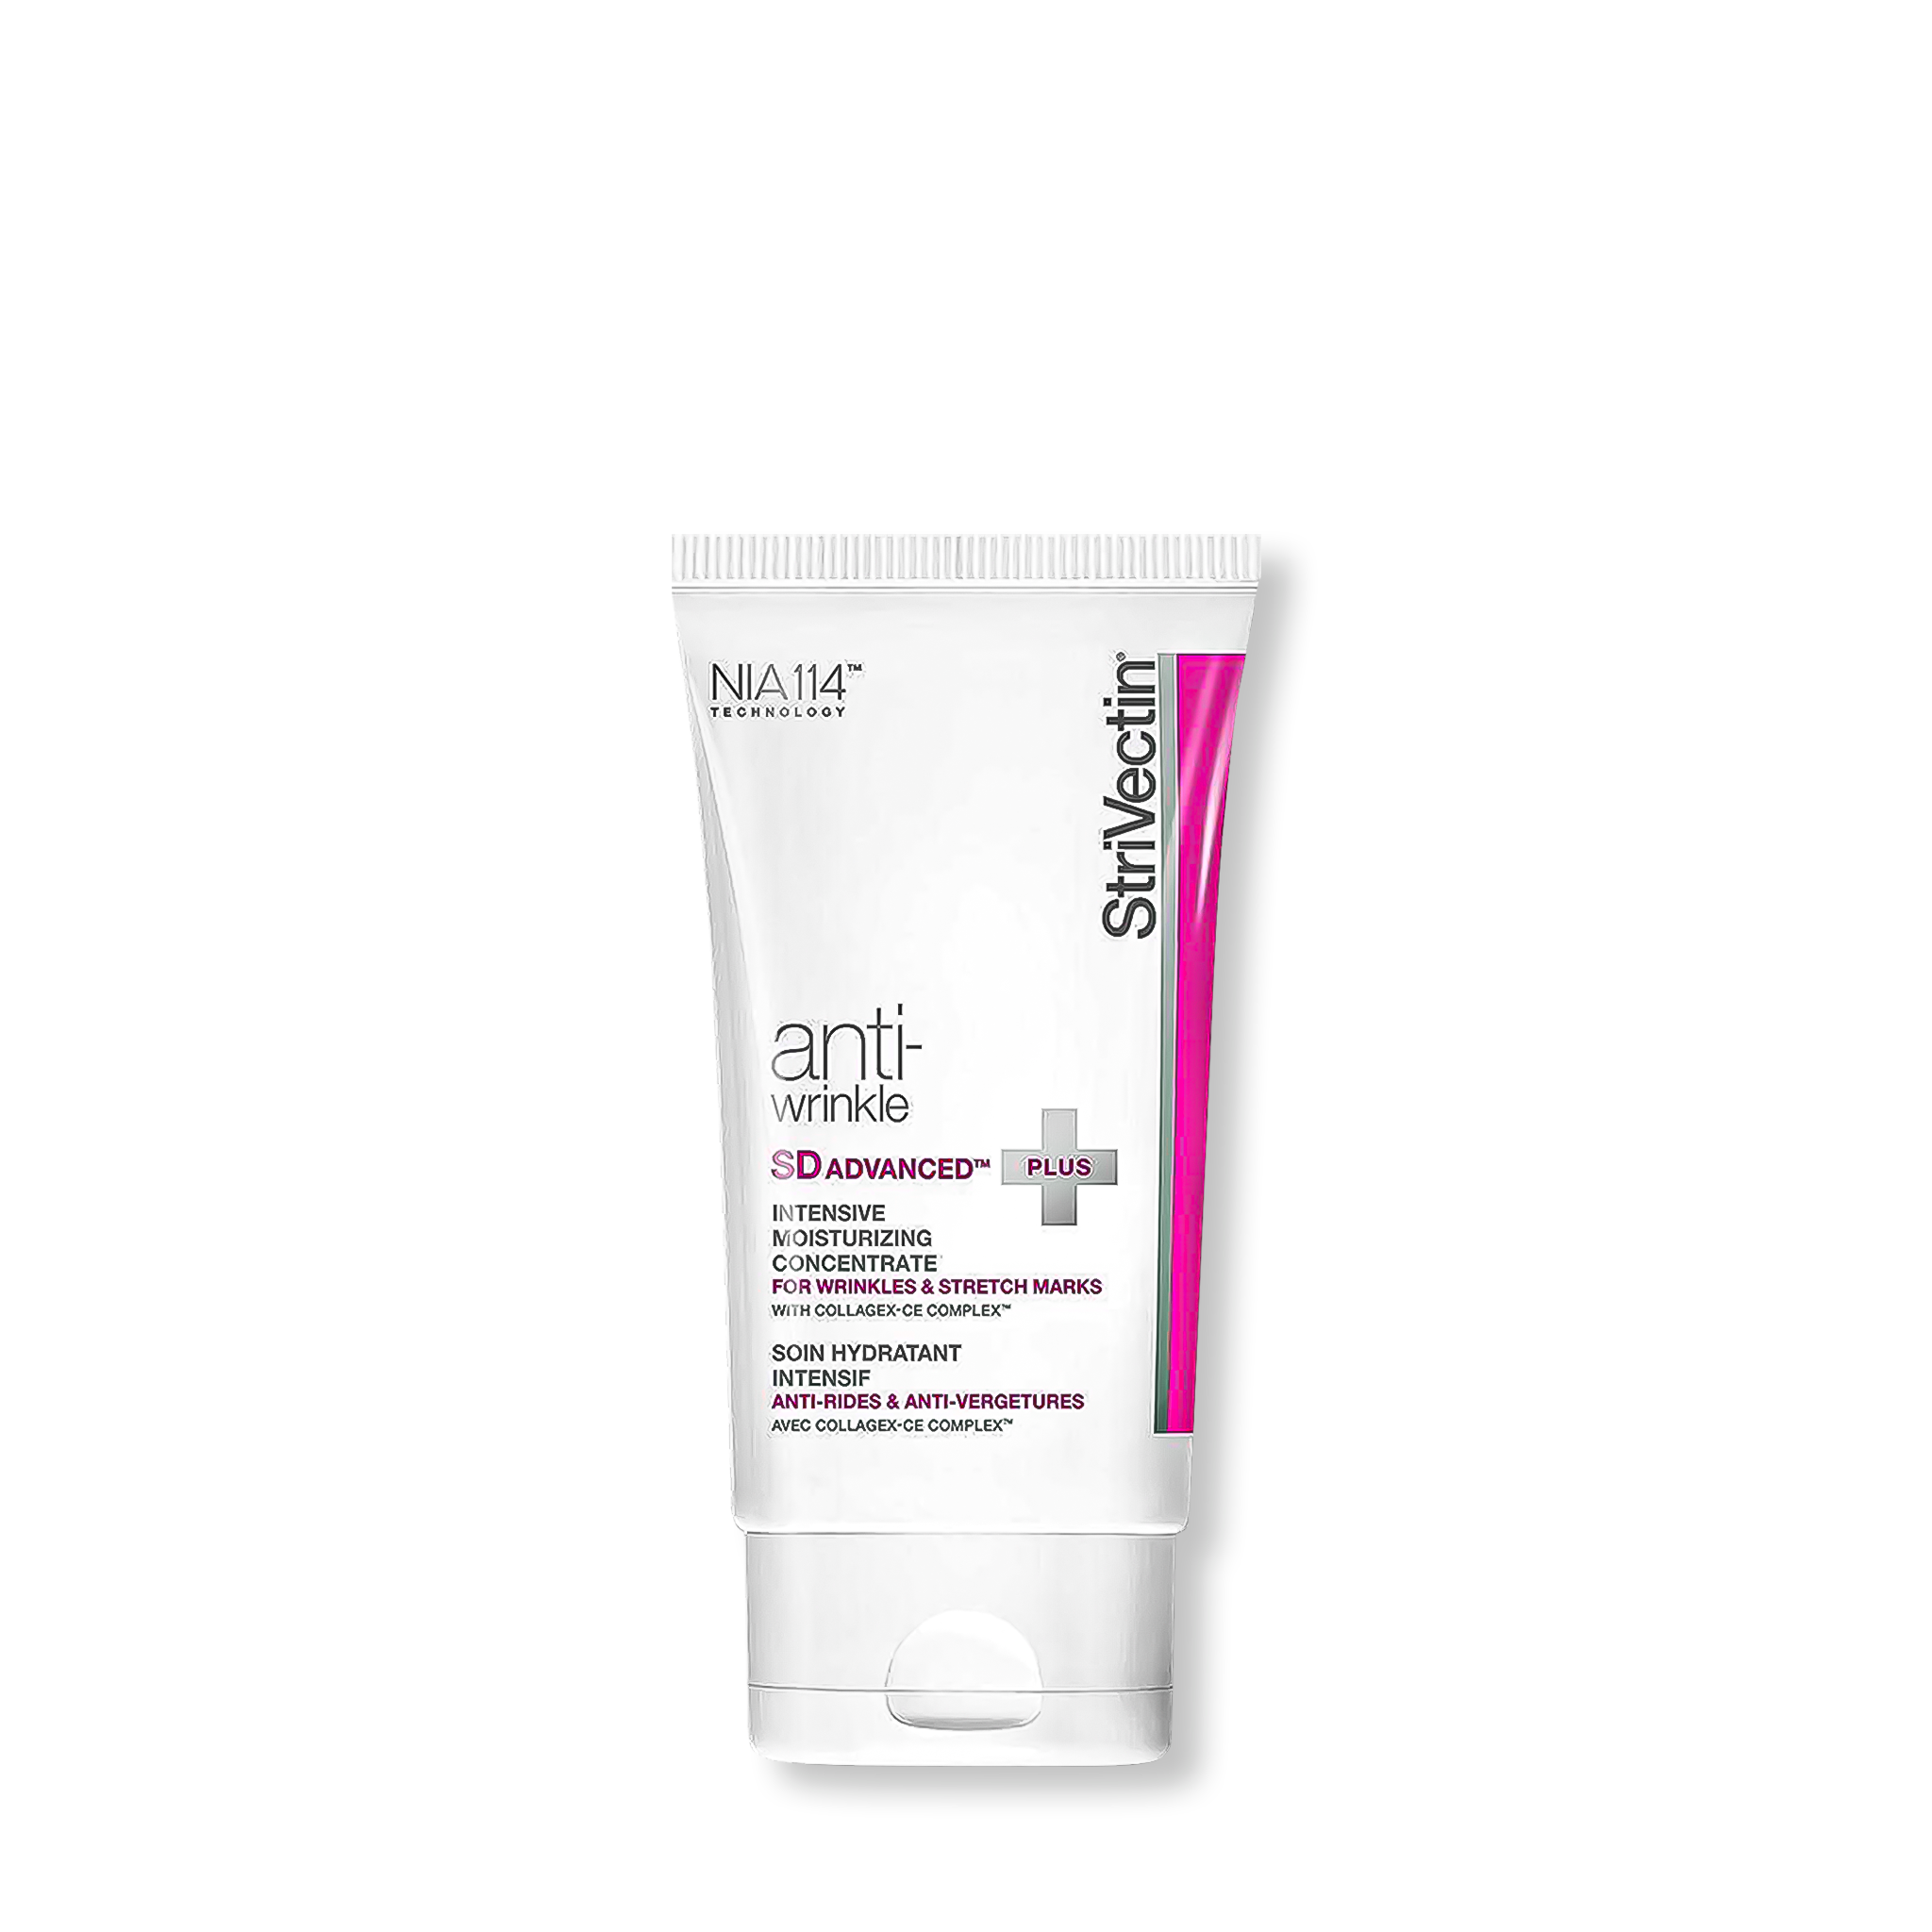 StriVectin SD Advanced Intensive Moisturizing Concentrate PLUS